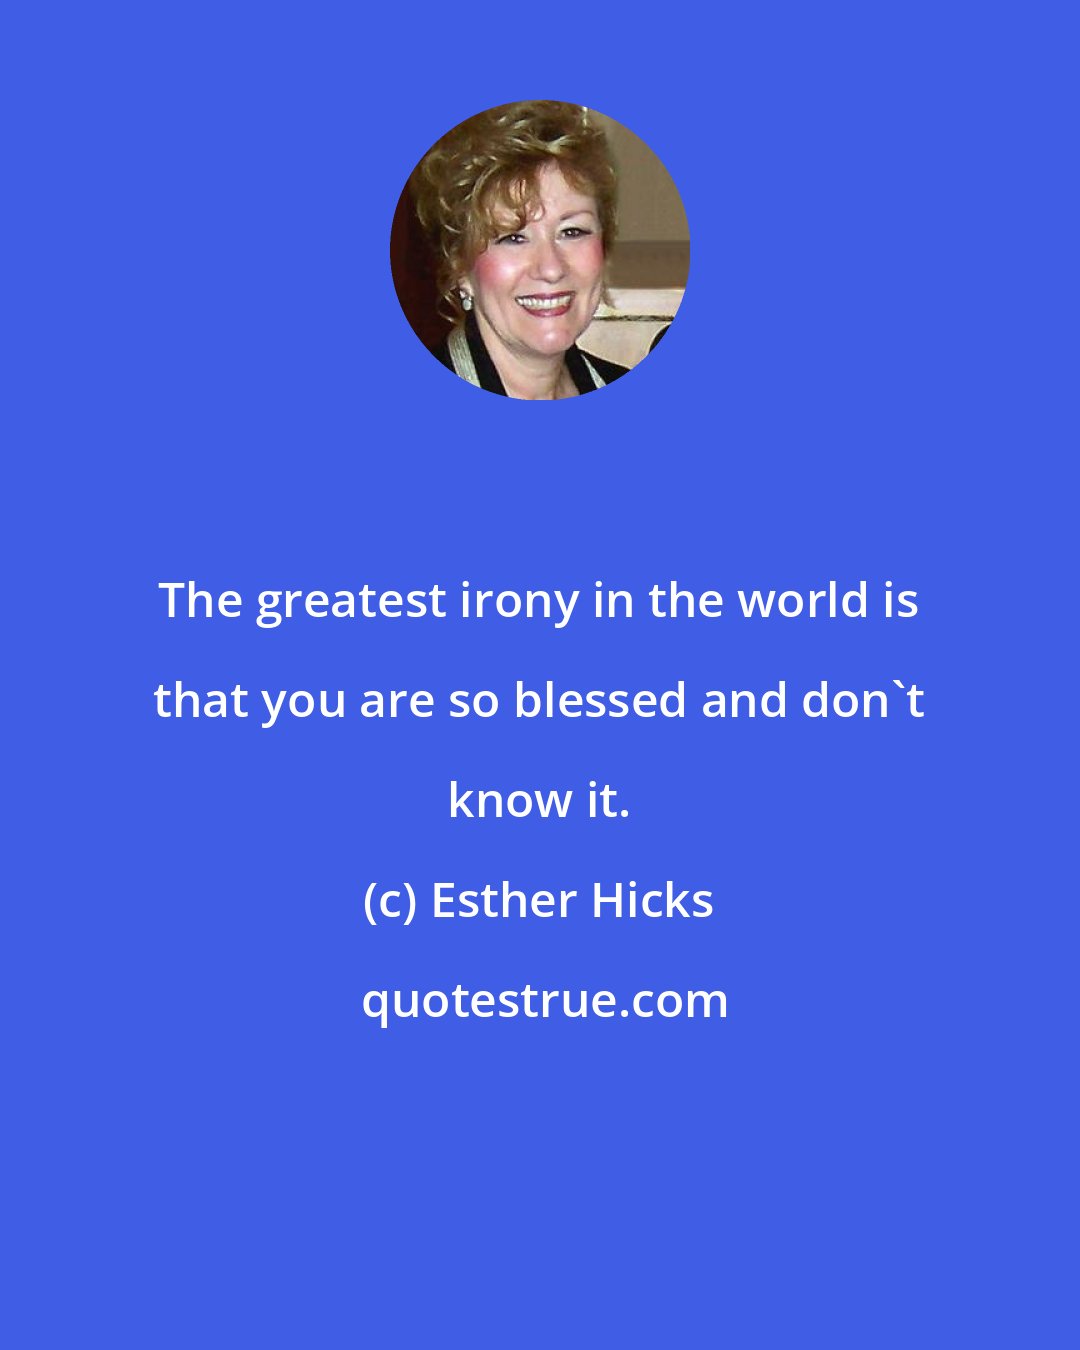 Esther Hicks: The greatest irony in the world is that you are so blessed and don't know it.